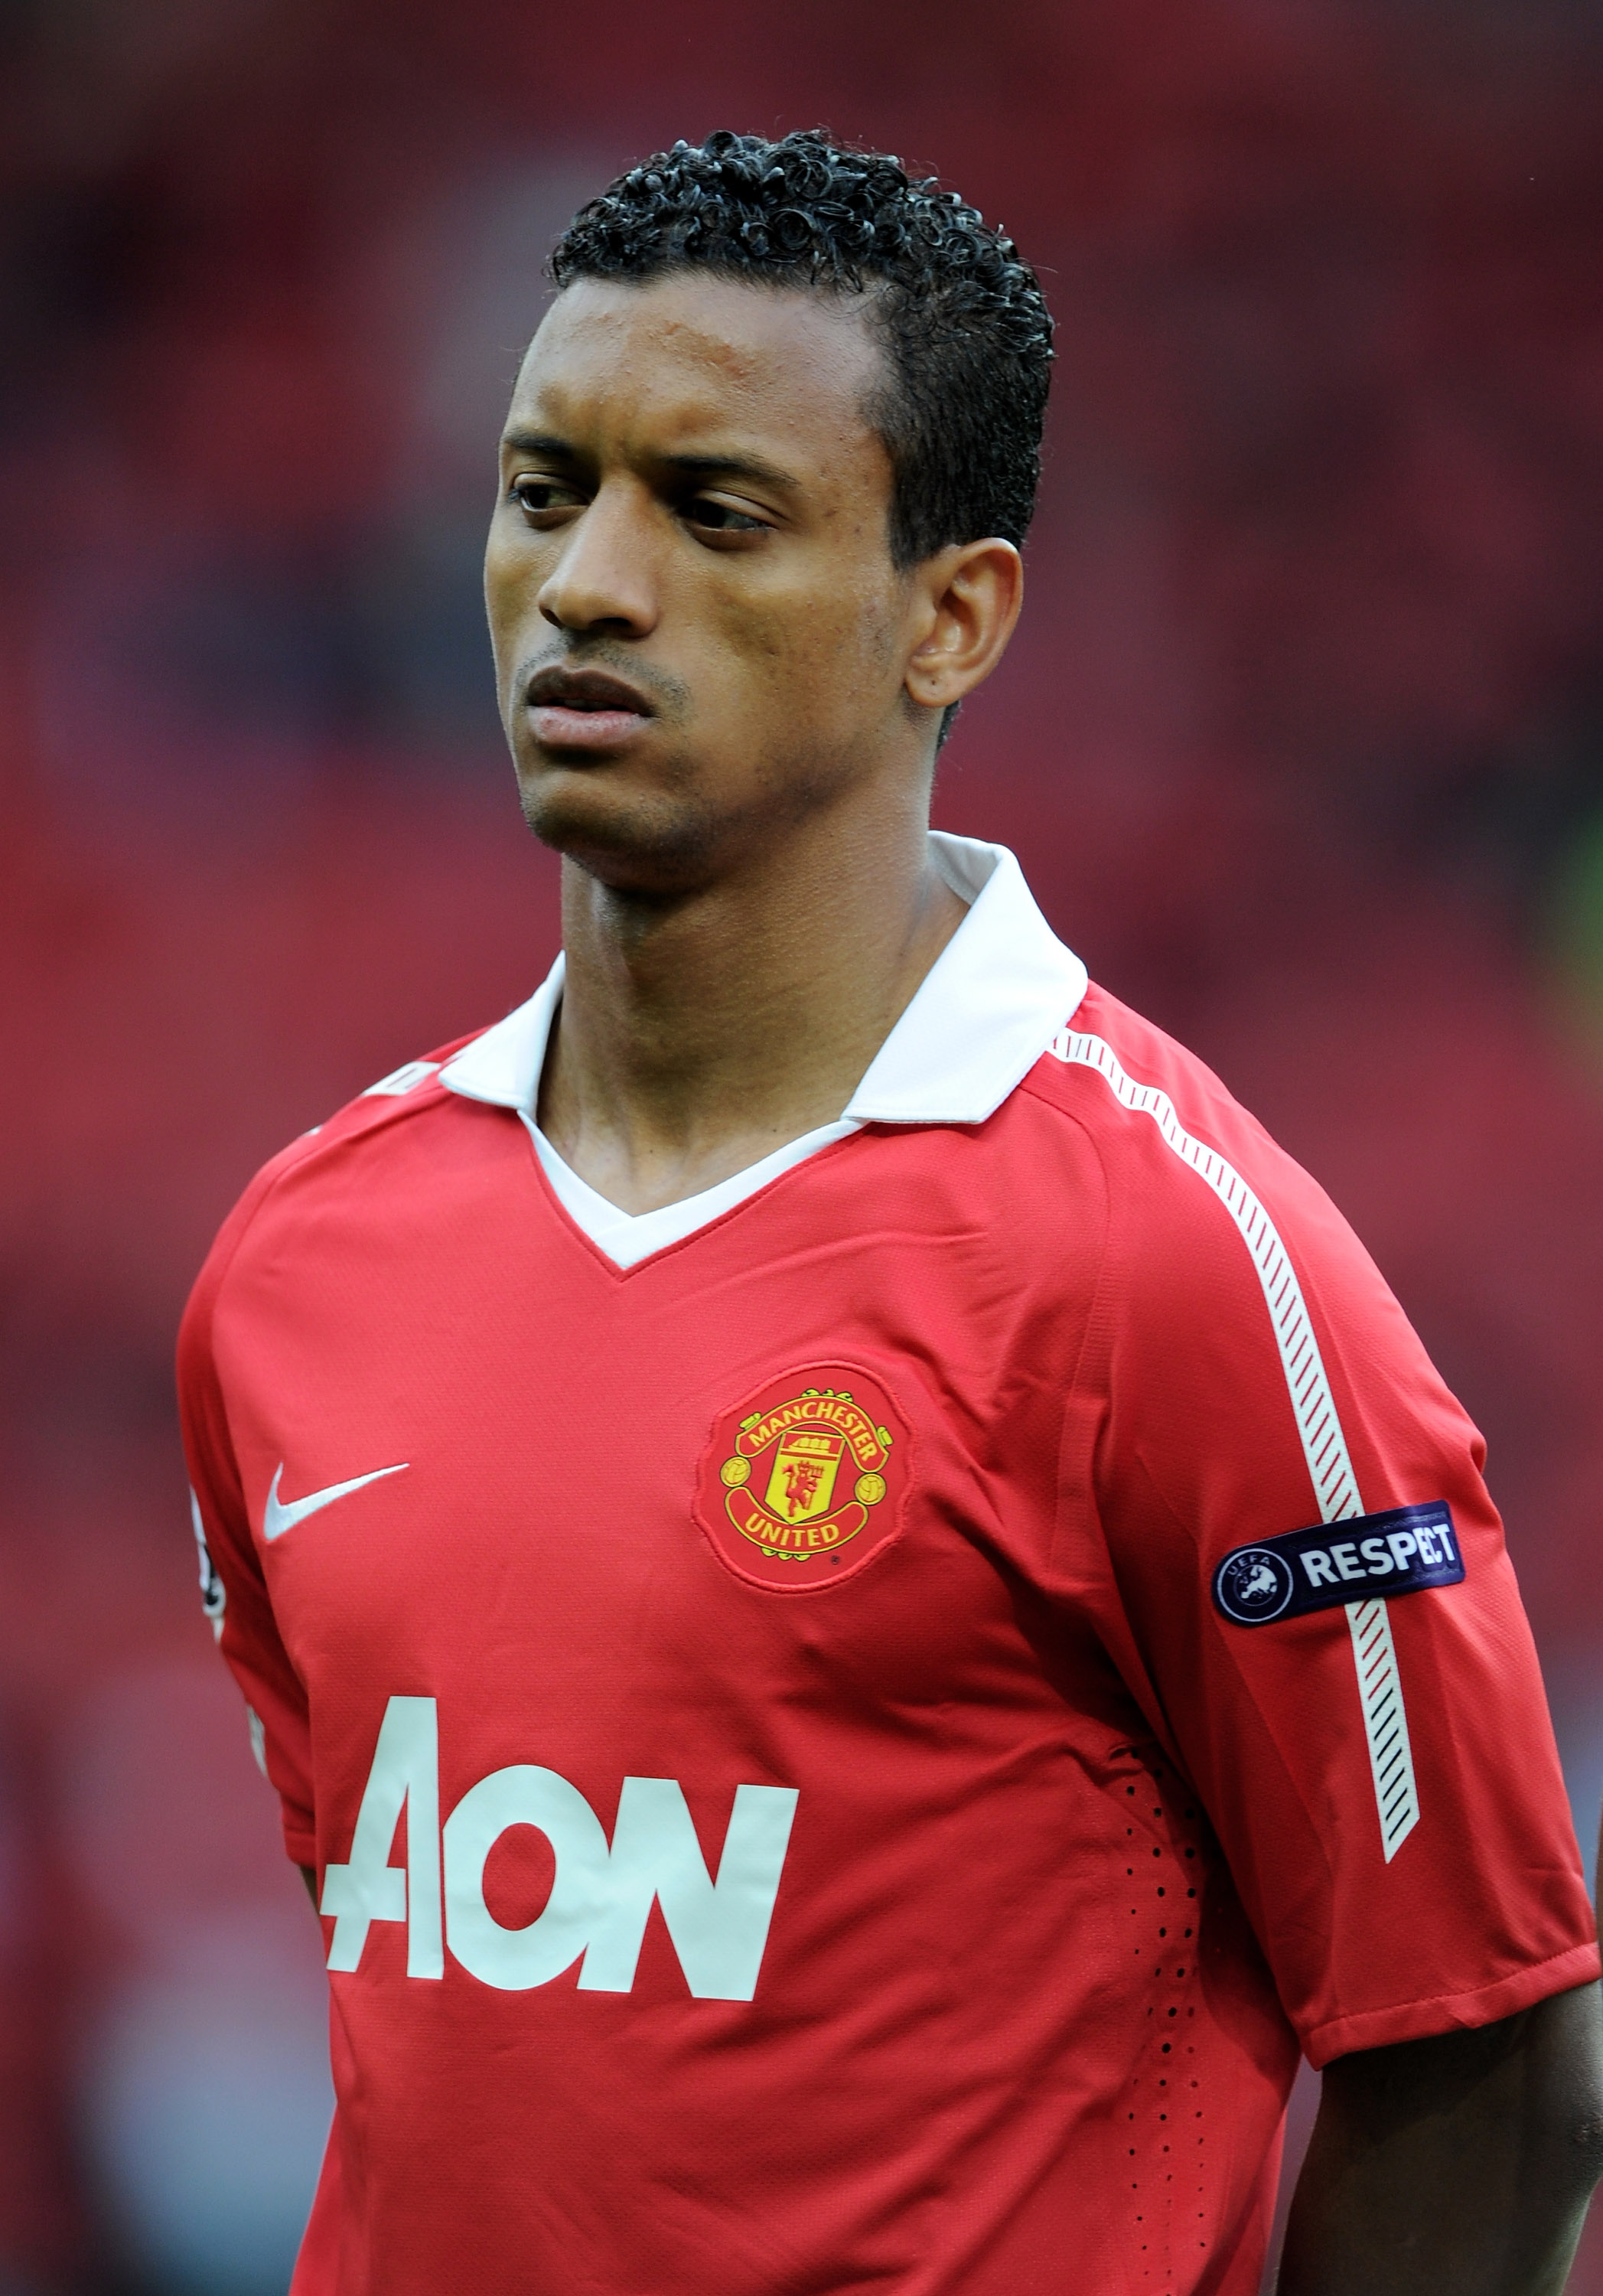 MANCHESTER, ENGLAND - MAY 04:  Nani of Manchester United lines up prior to the UEFA Champions League Semi Final second leg match between Manchester United and Schalke at Old Trafford on May 4, 2011 in Manchester, England.  (Photo by Michael Regan/Getty Im